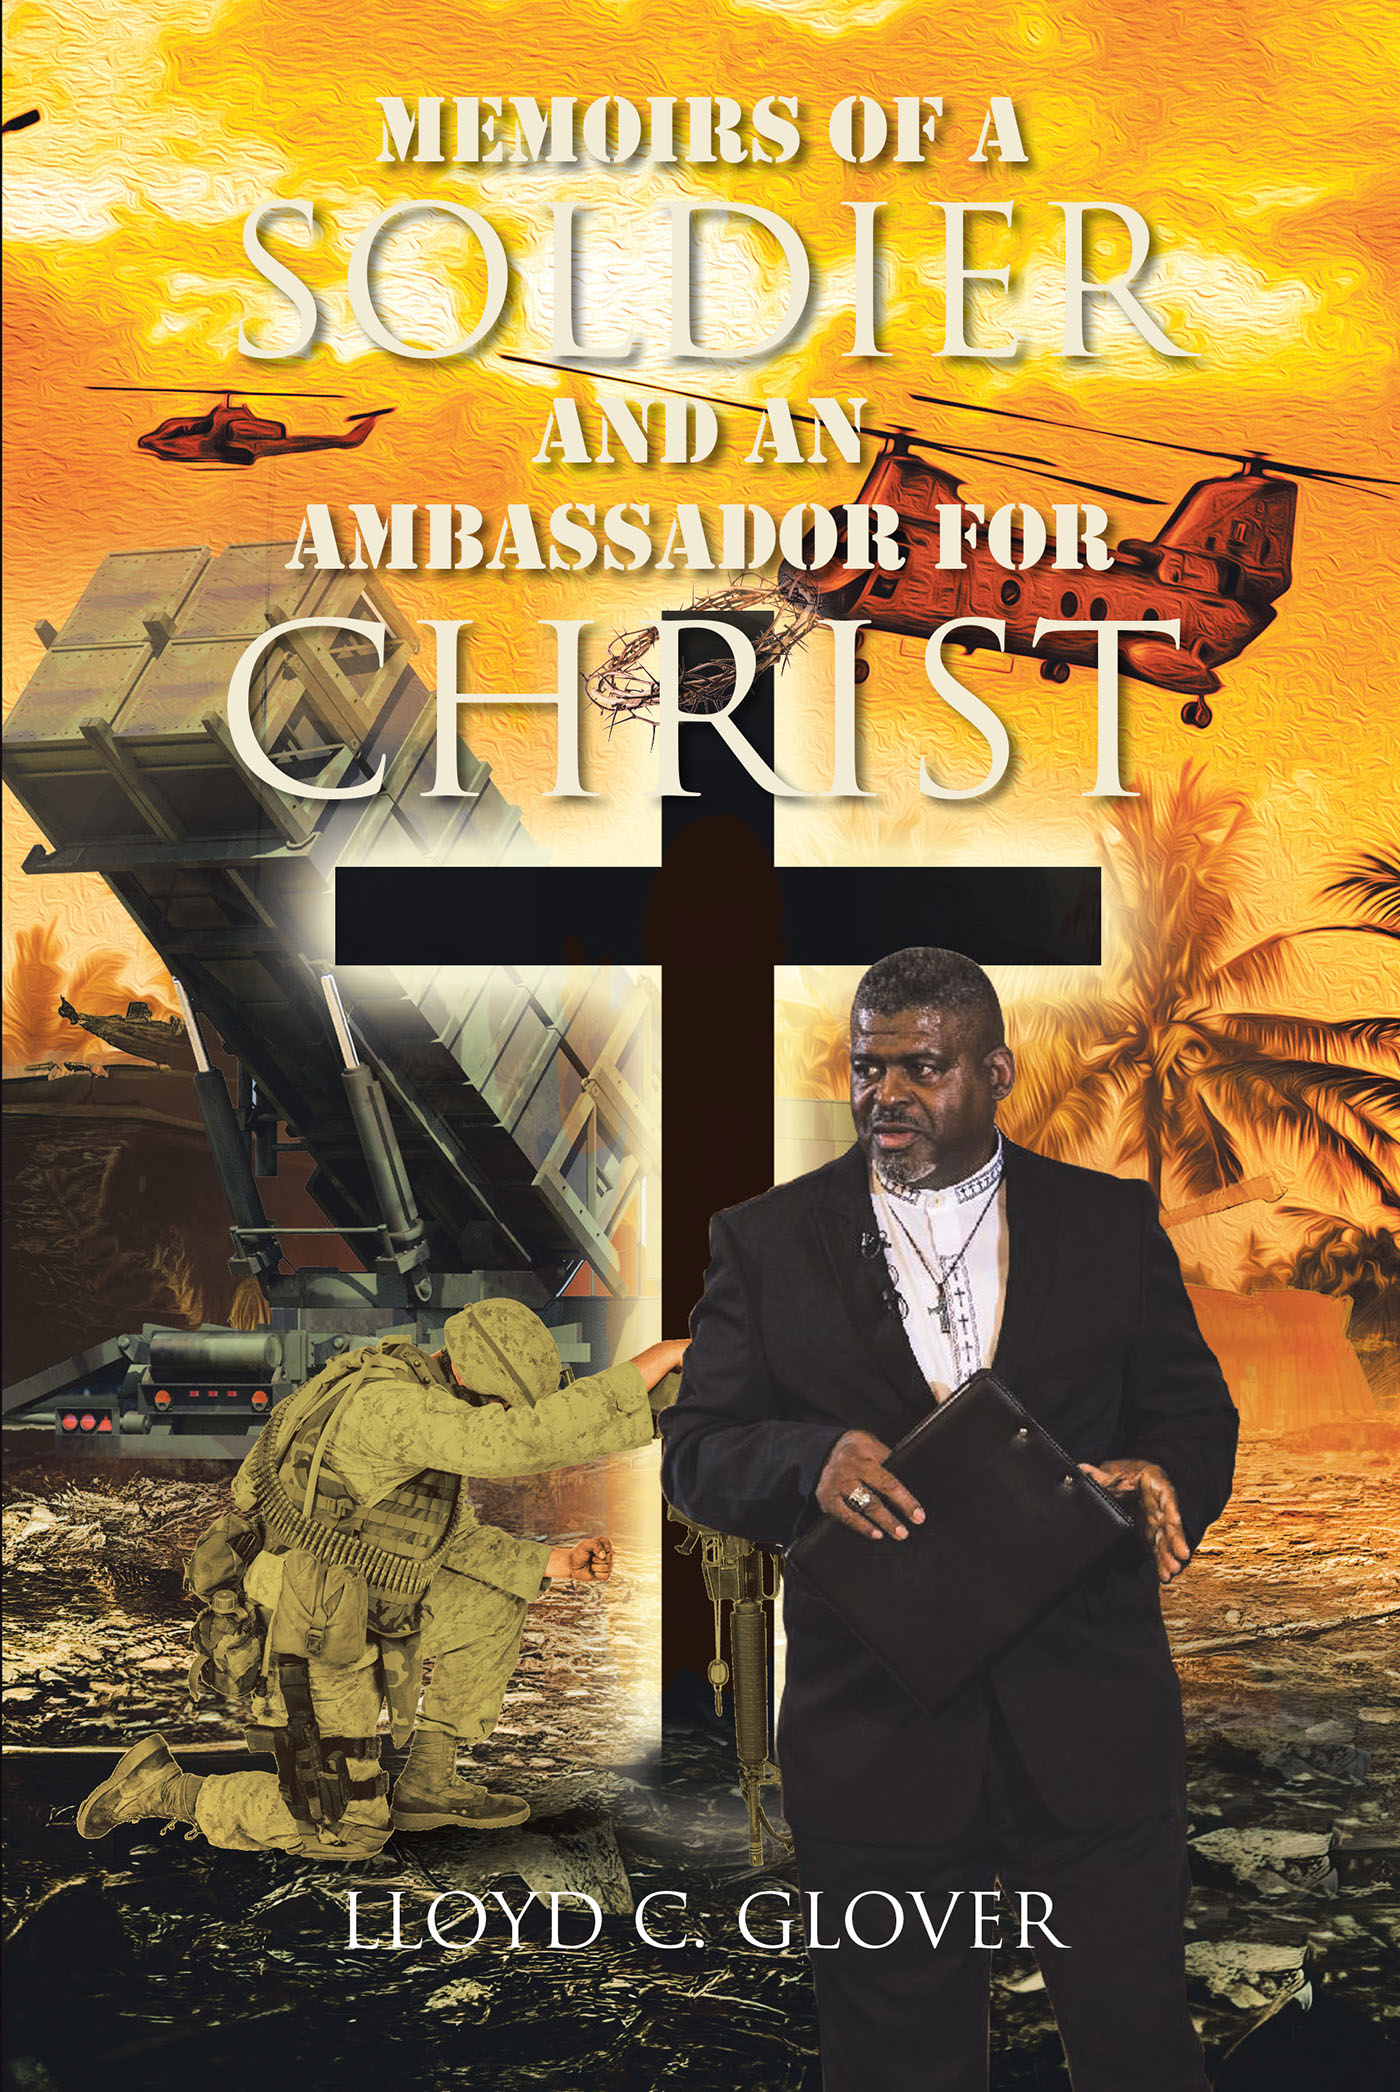 Lloyd C. Glover’s Newly Released "Memoirs of a Soldier and an Ambassador for Christ" is an Inspiring Memoir That Presents an Intimate Look Into the Author’s Experiences